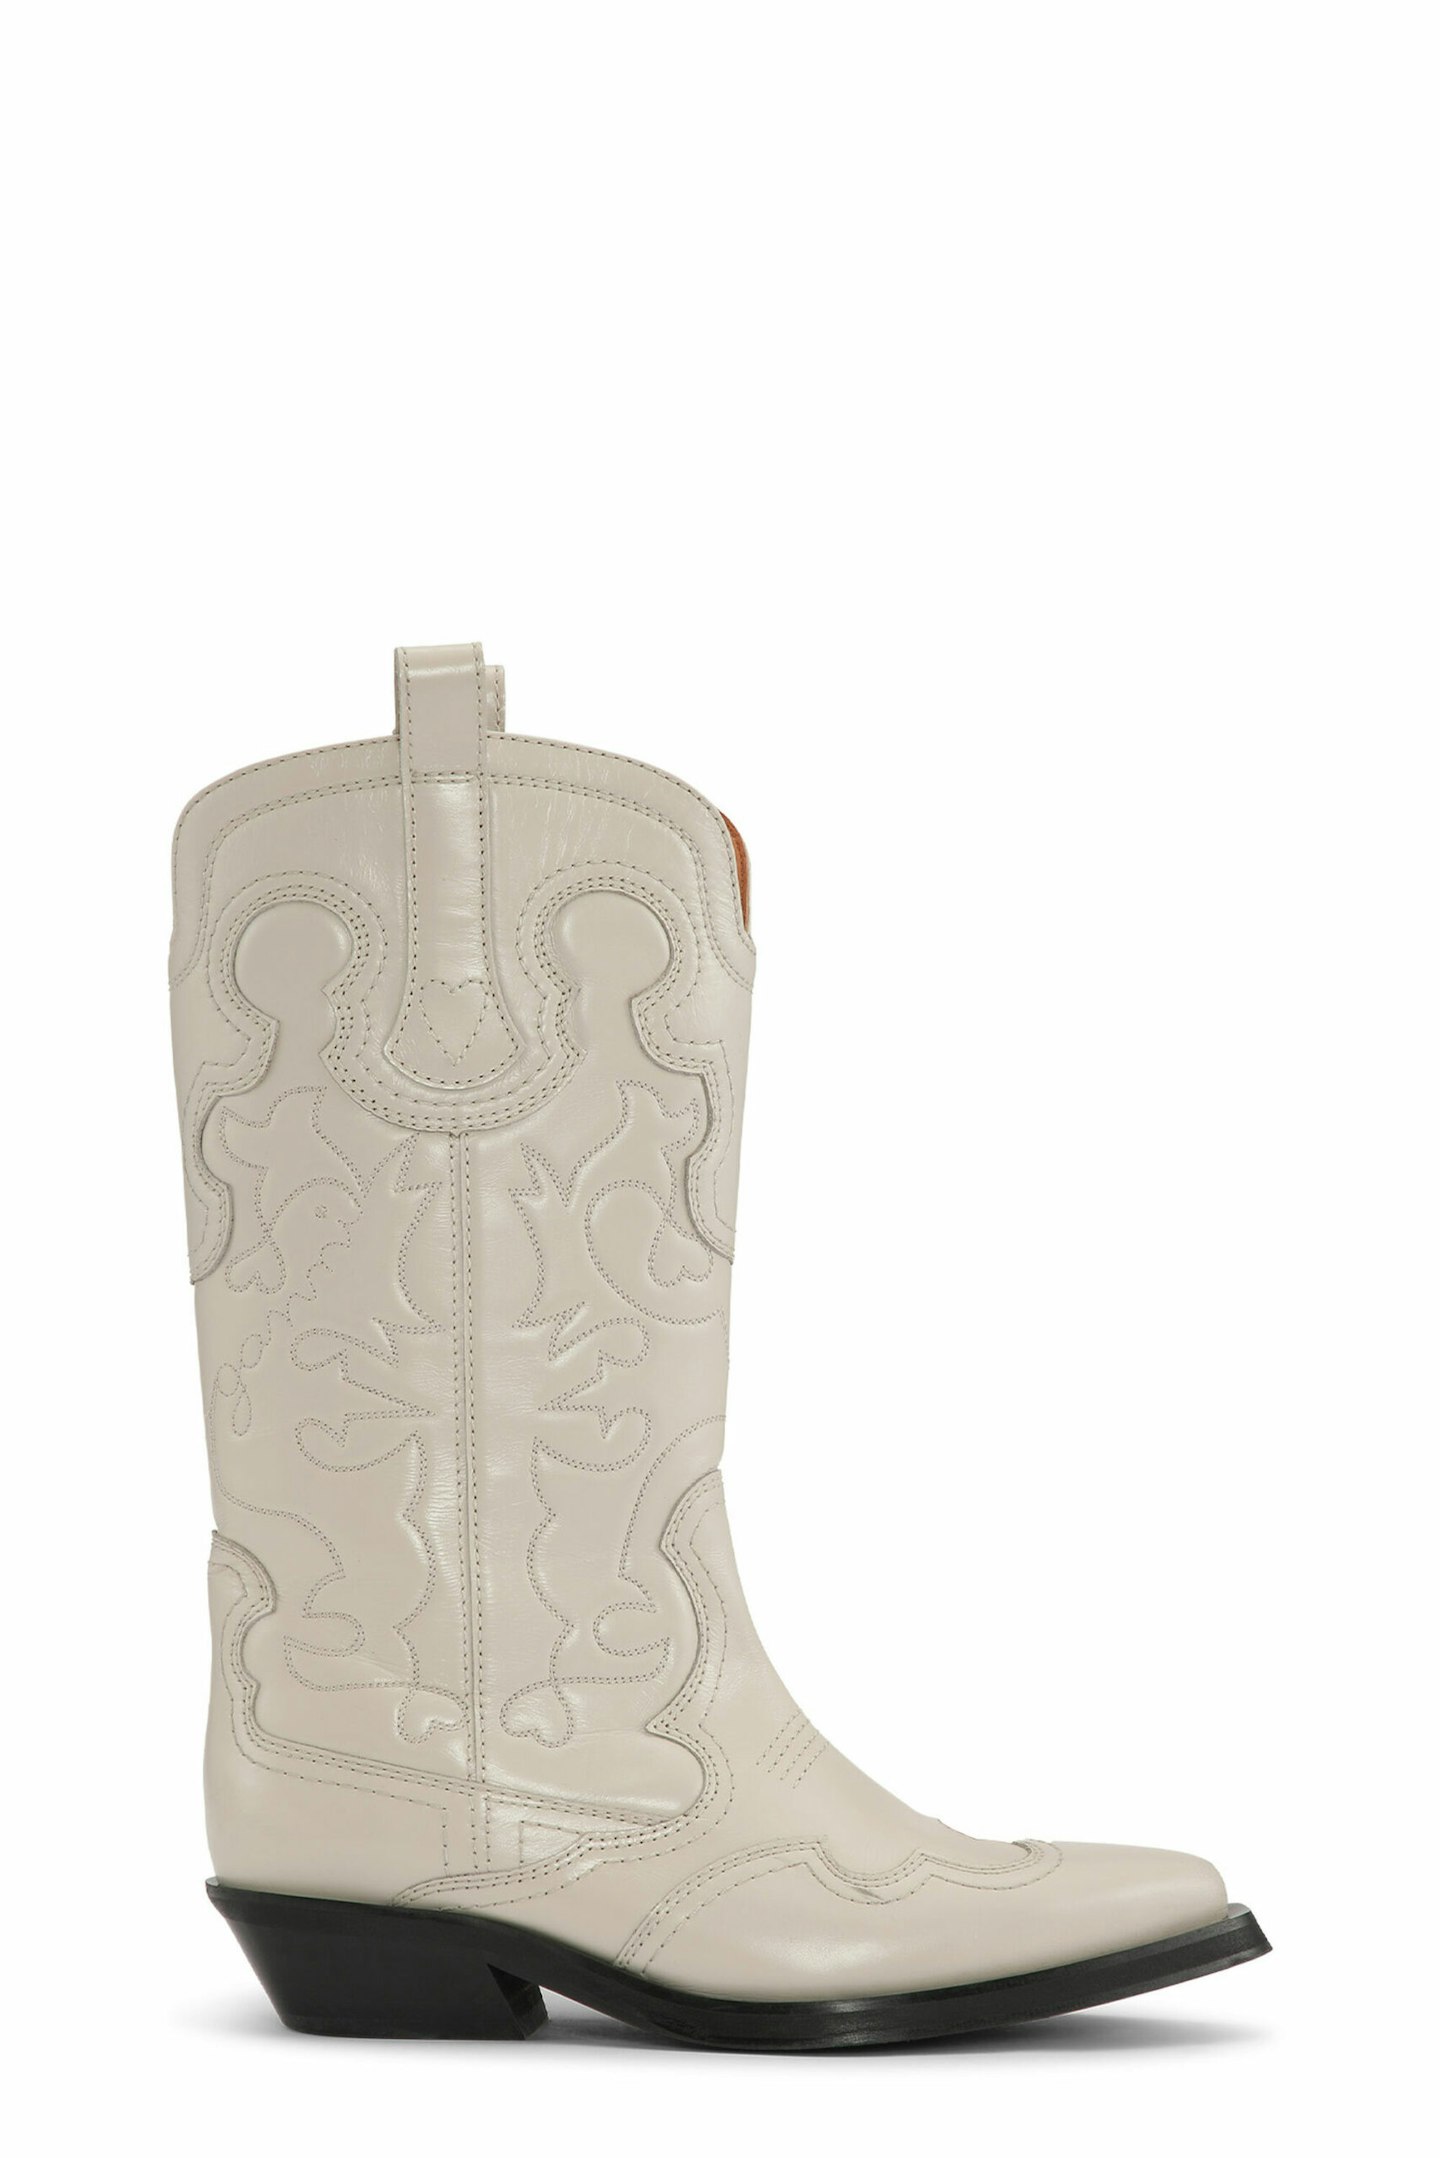 Ganni, White Embroidered Western Boots